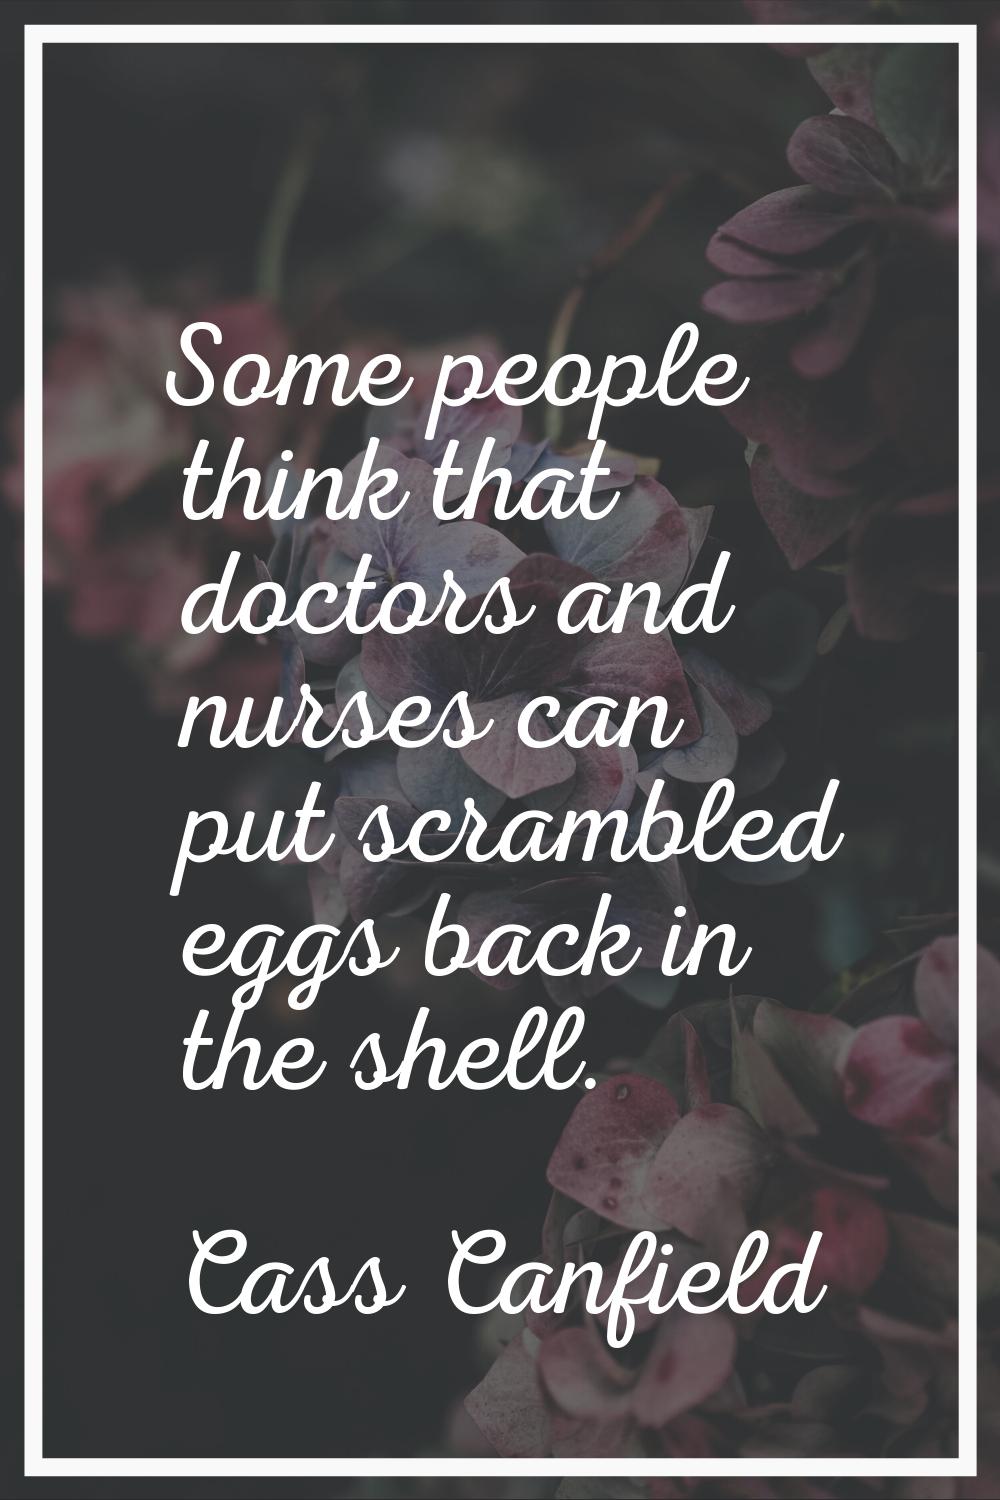 Some people think that doctors and nurses can put scrambled eggs back in the shell.